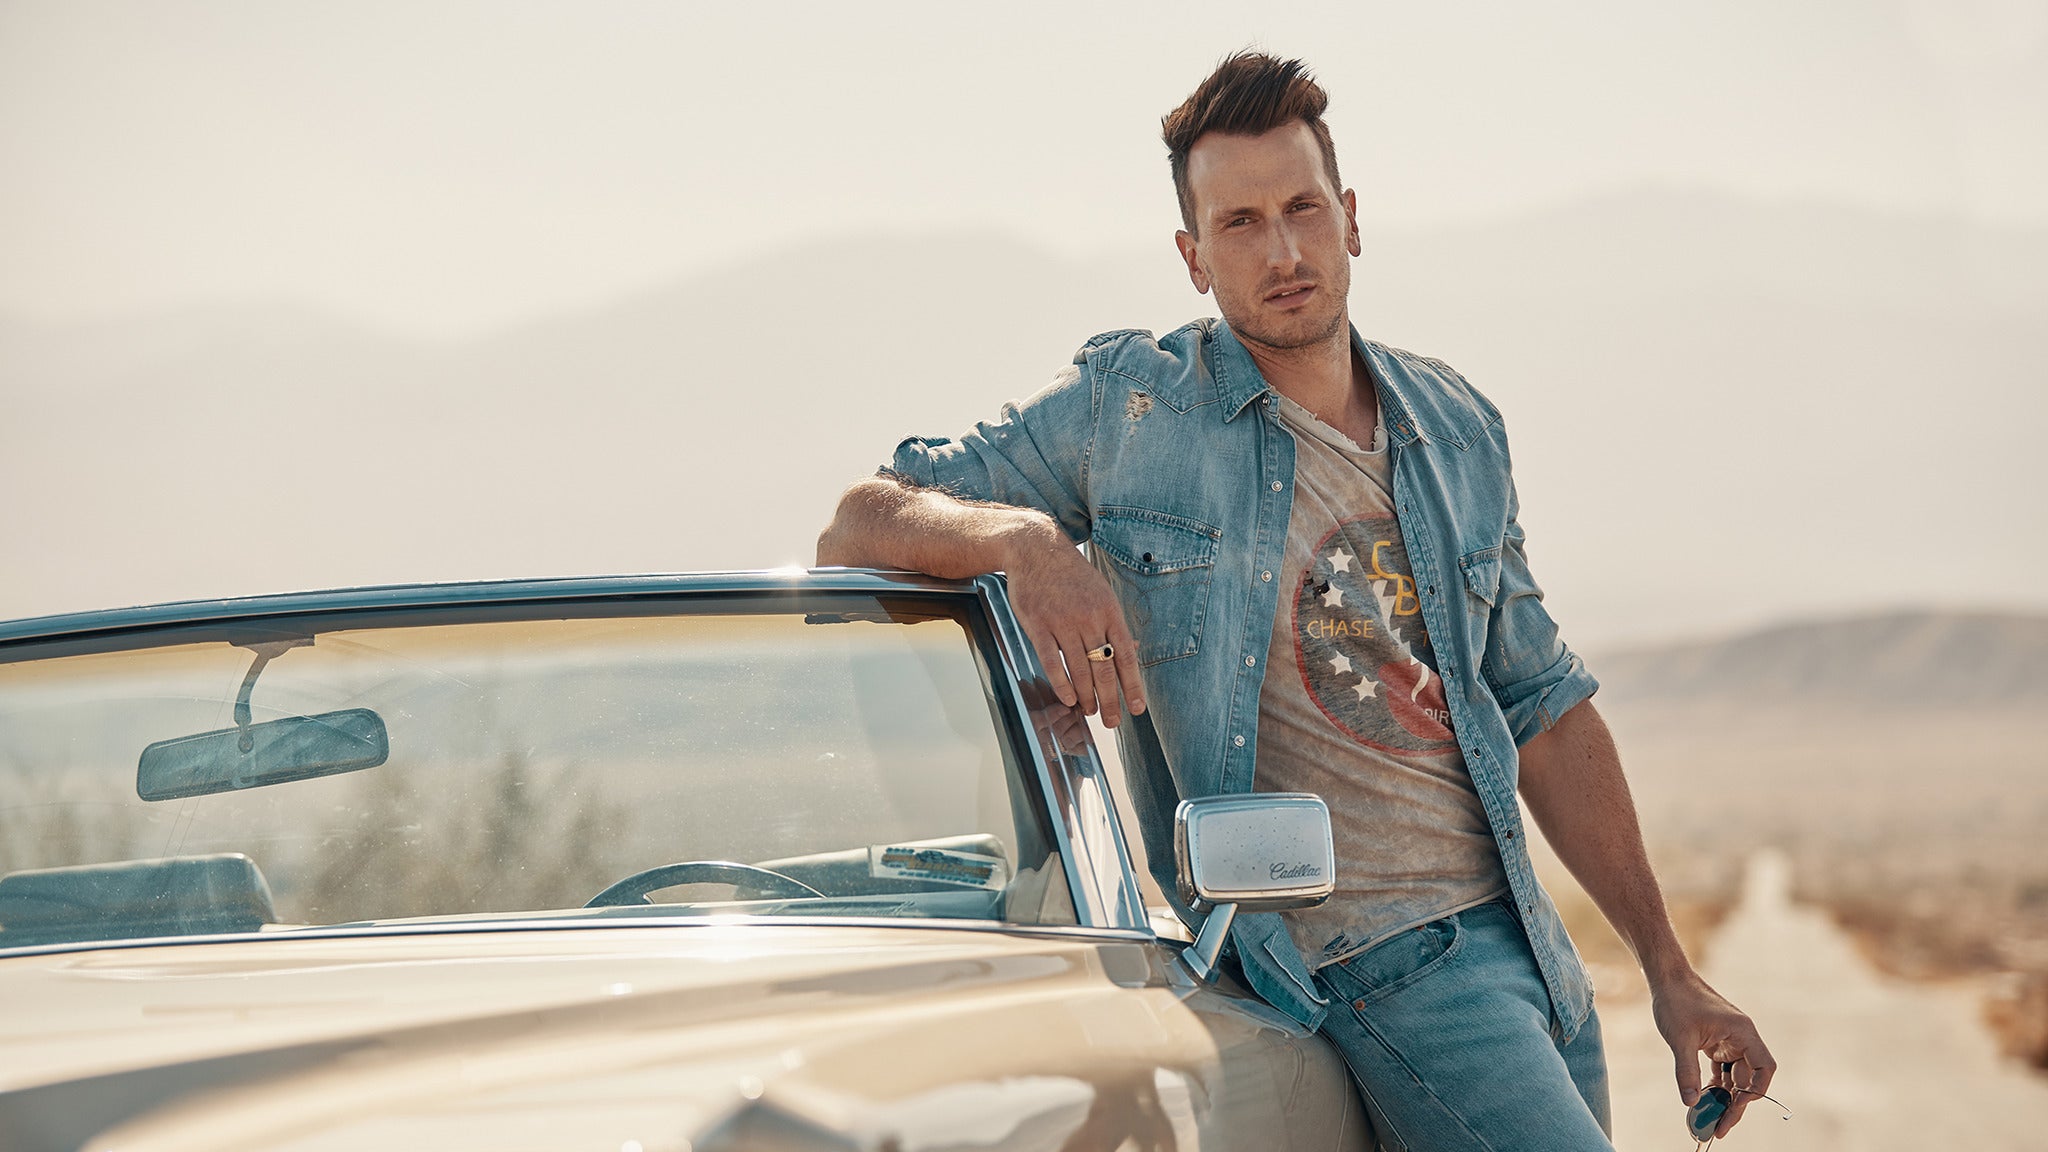 Russell Dickerson at Tulsa Expo Center